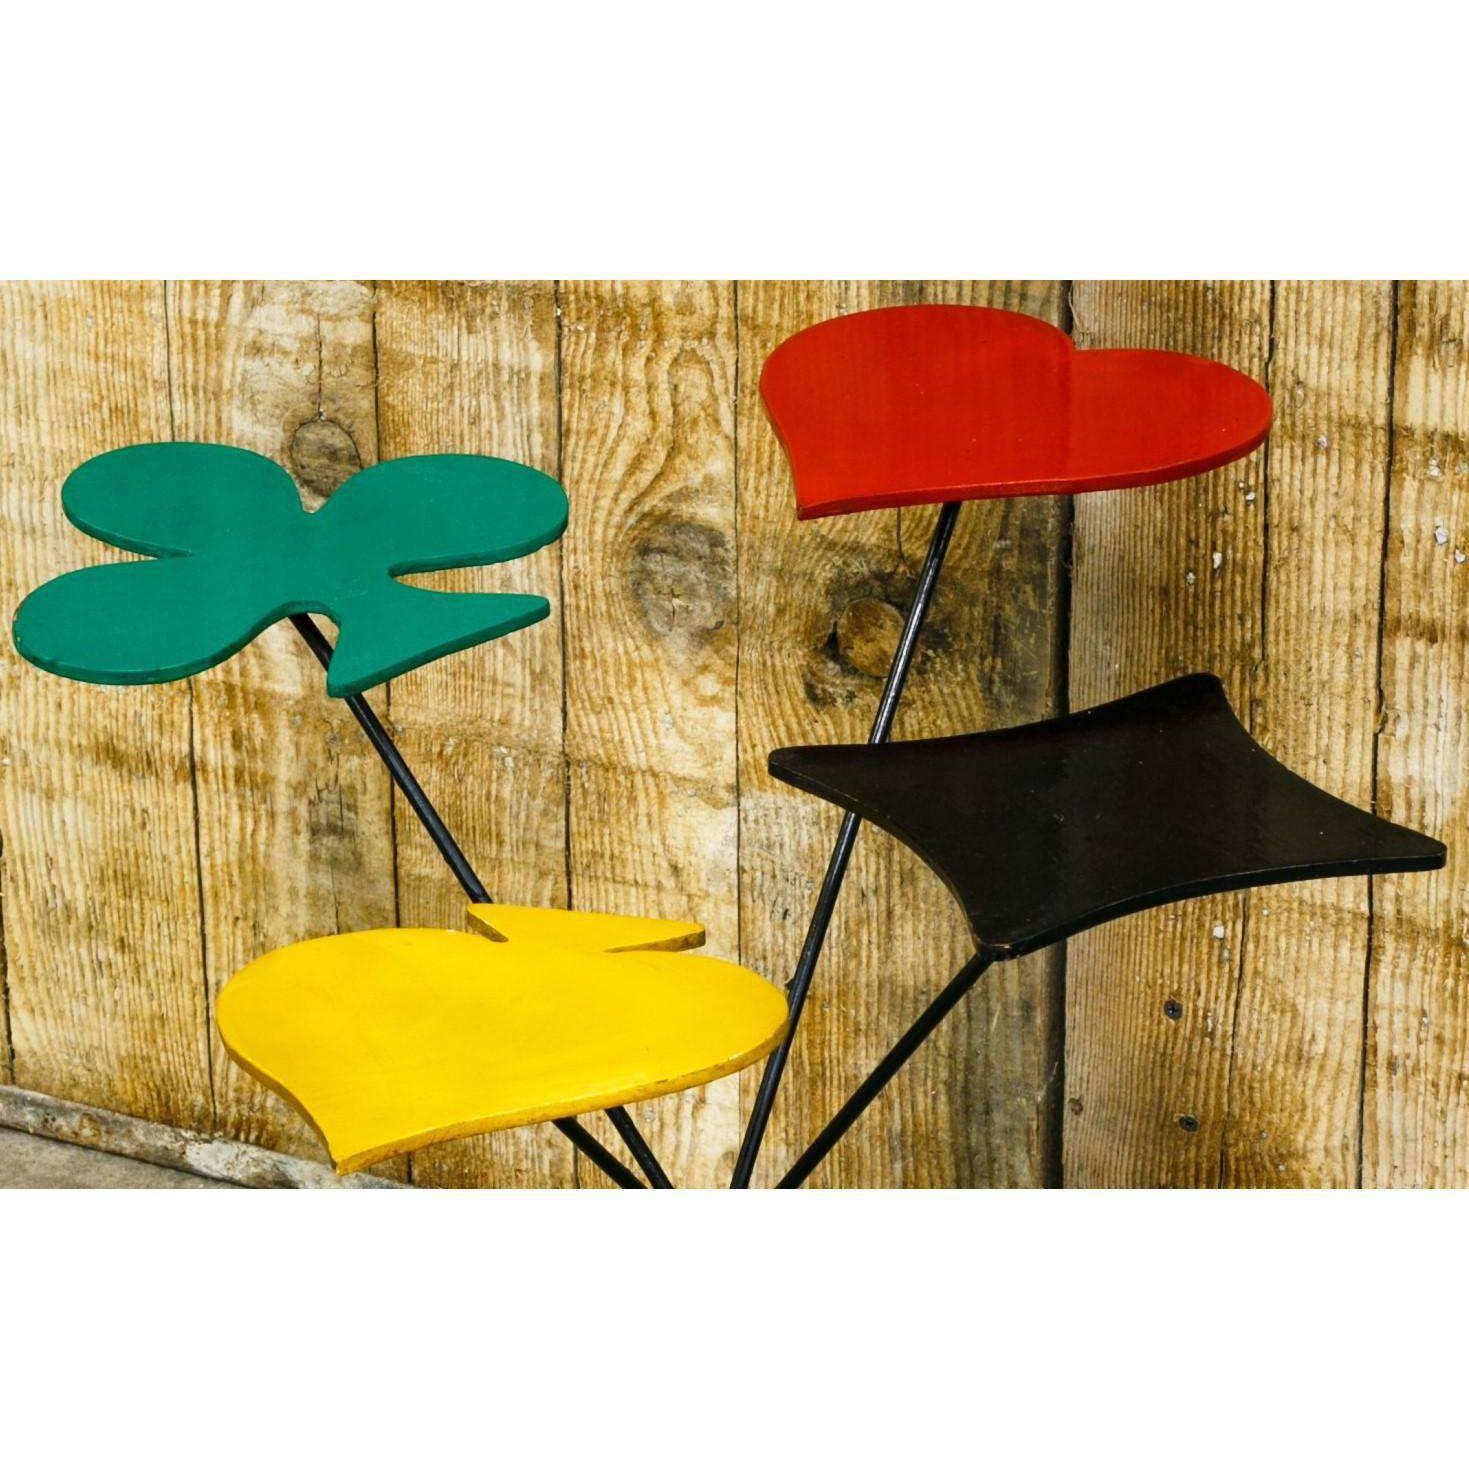 Wood and iron colorful multi-level side table with a heart, spade, club and diamond shape. Was created for the 1958 World's Fair in Belgium. Would make a great cocktail table or sculptural piece of art. Base is iron, shapes are enamel painted wood.